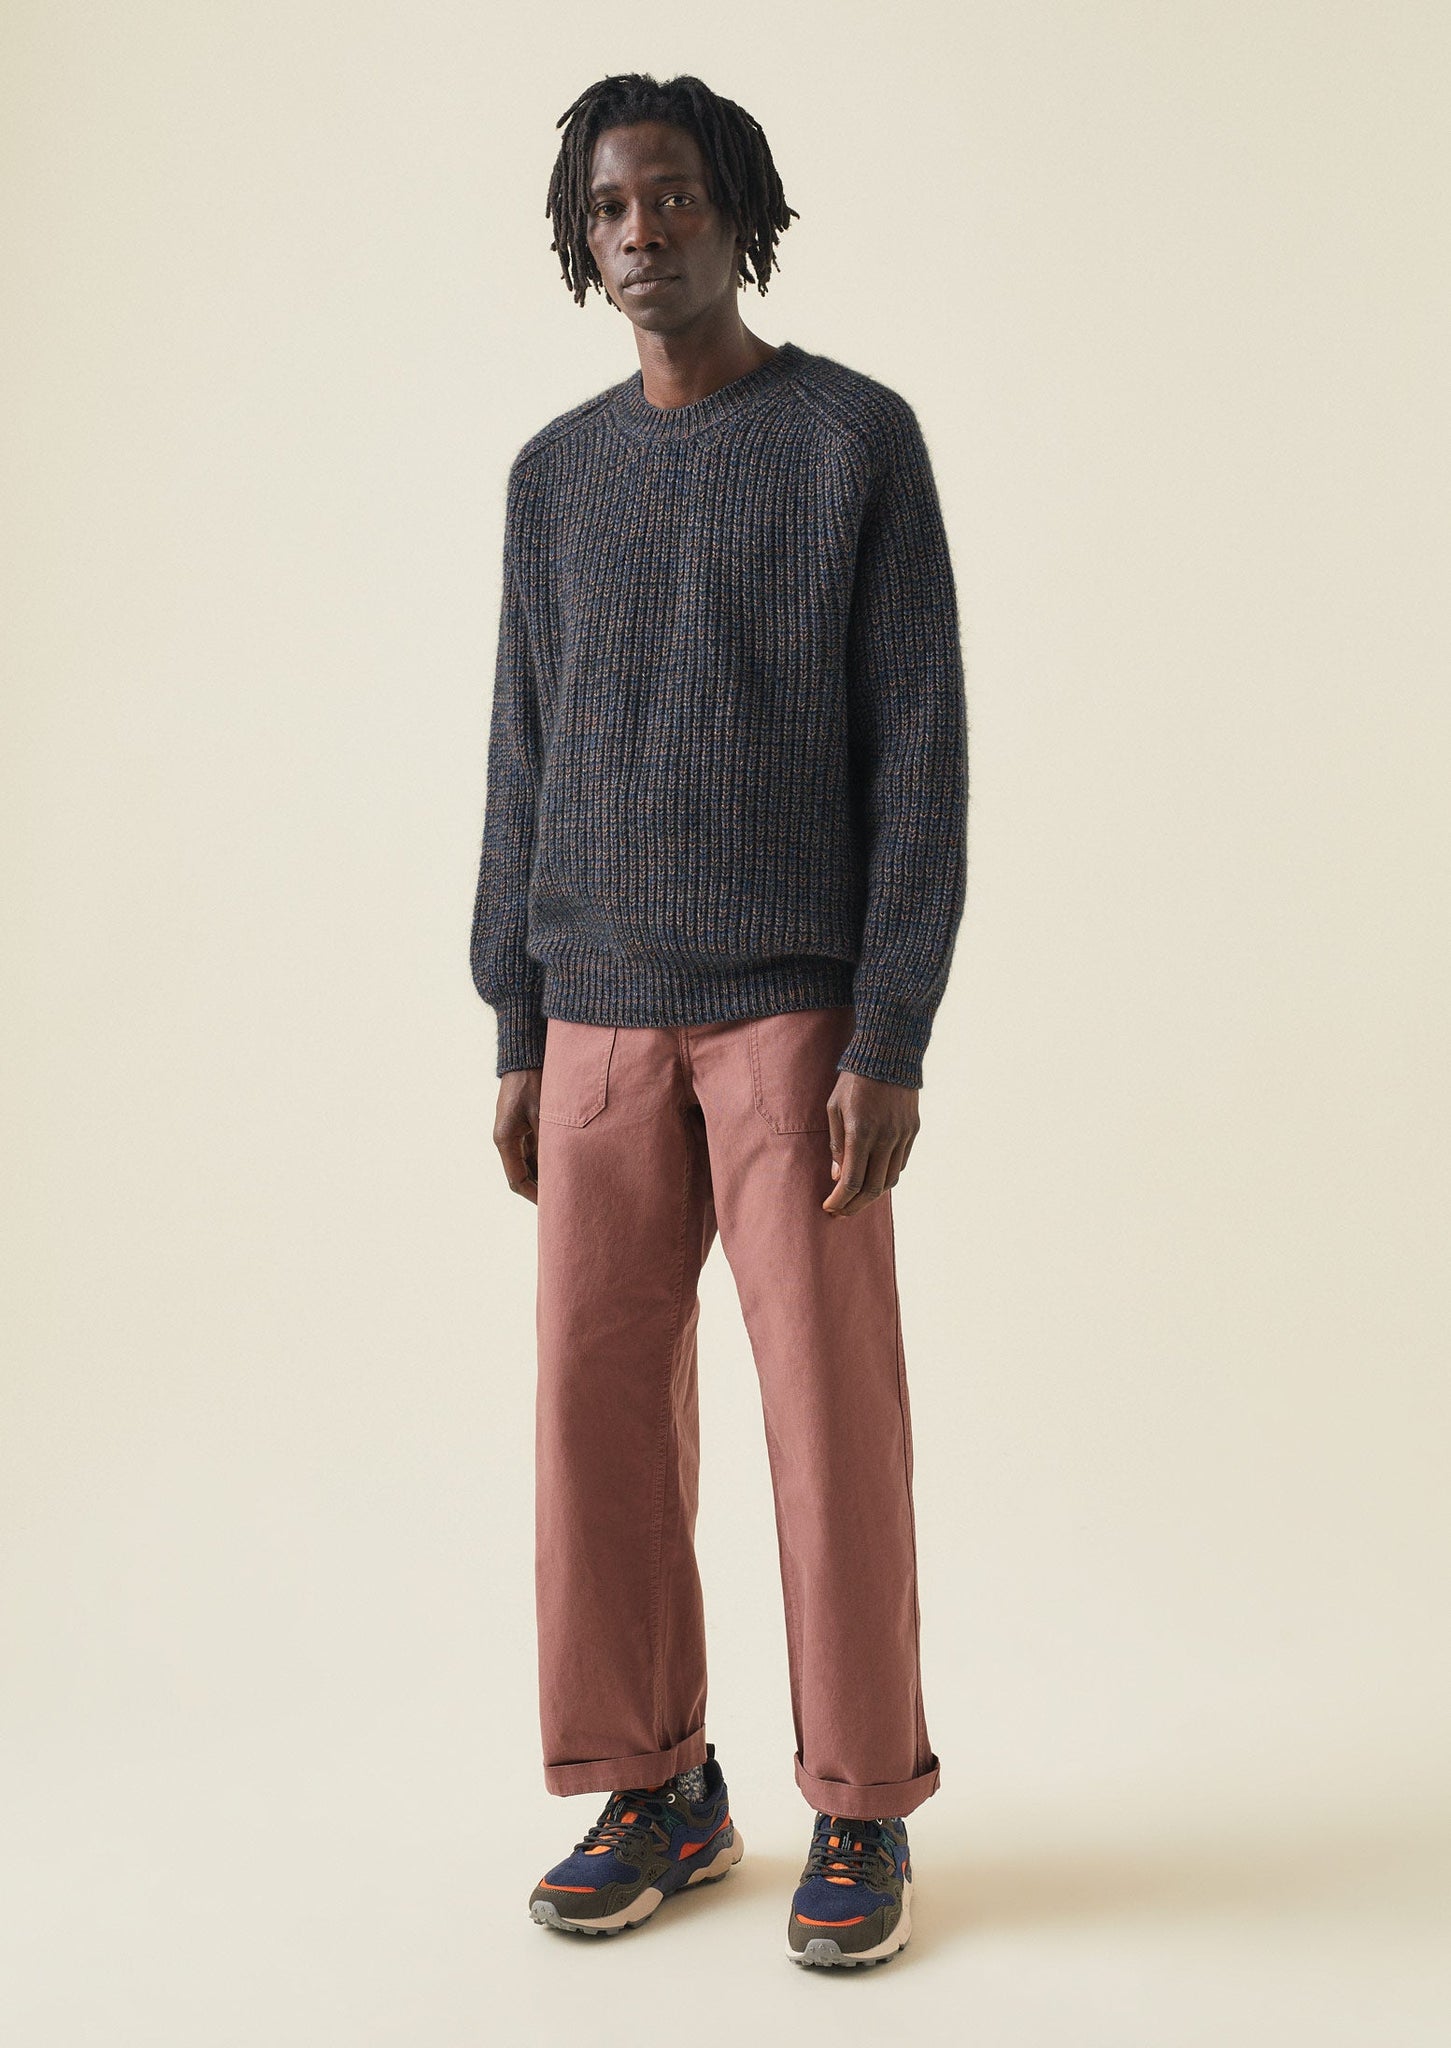 Rory Carpenter Canvas Pants | Dusty Pink